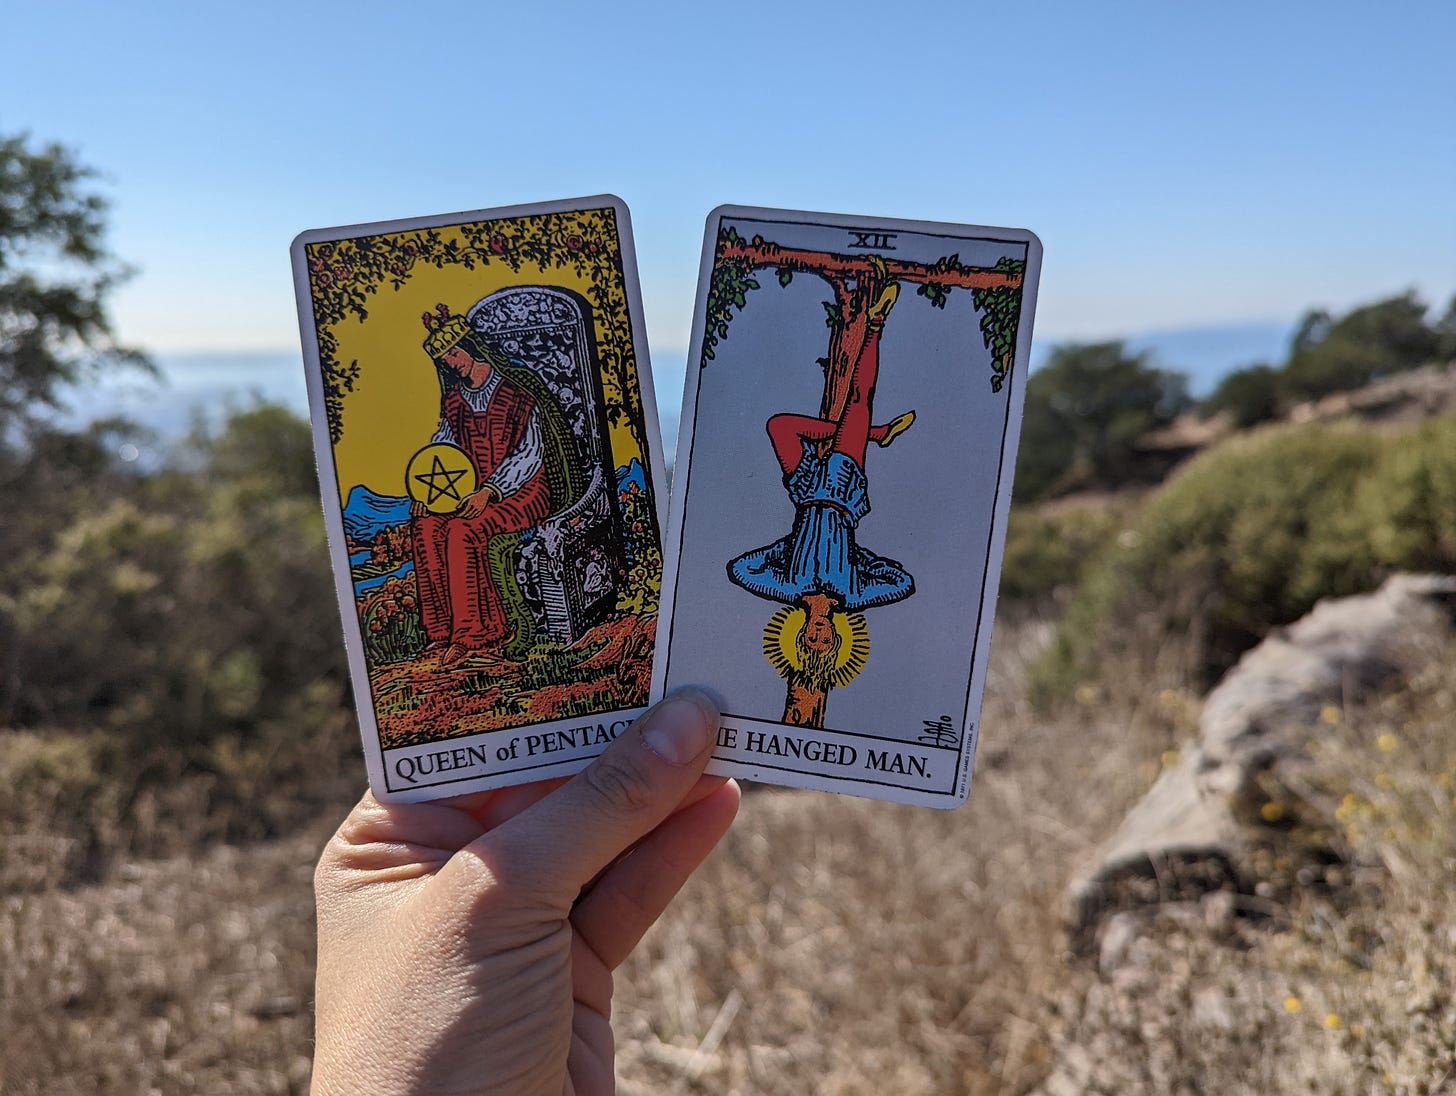 A hand holds up two tarot cards: Queen of Pentacles and The Hanged Man. In the background are rolling hills with dry grass and a few green bushes and trees.